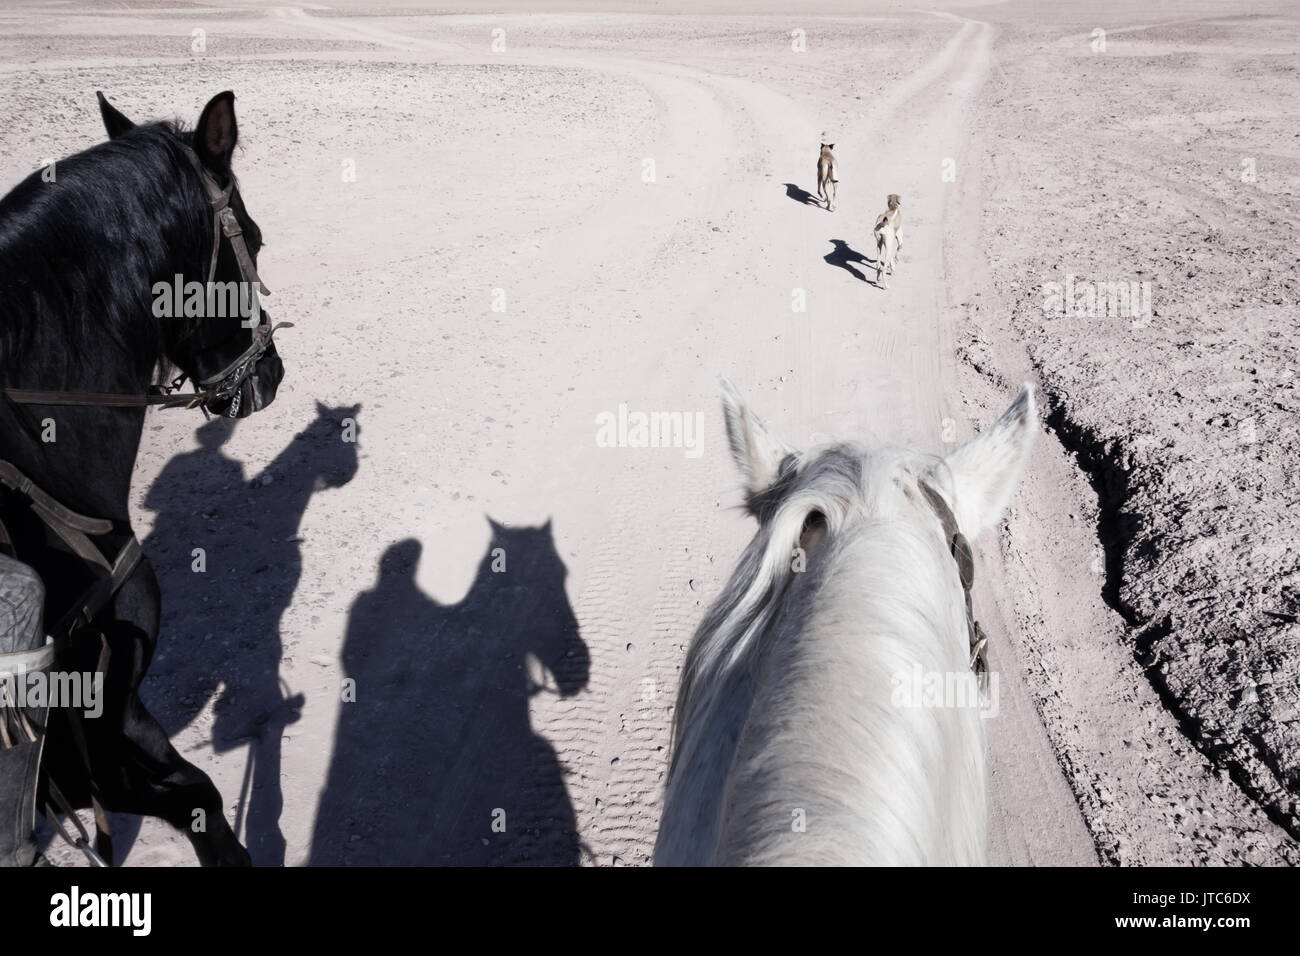 Horse riders (shadows) with dogs on stony desert plateau with diverging roads. Stock Photo